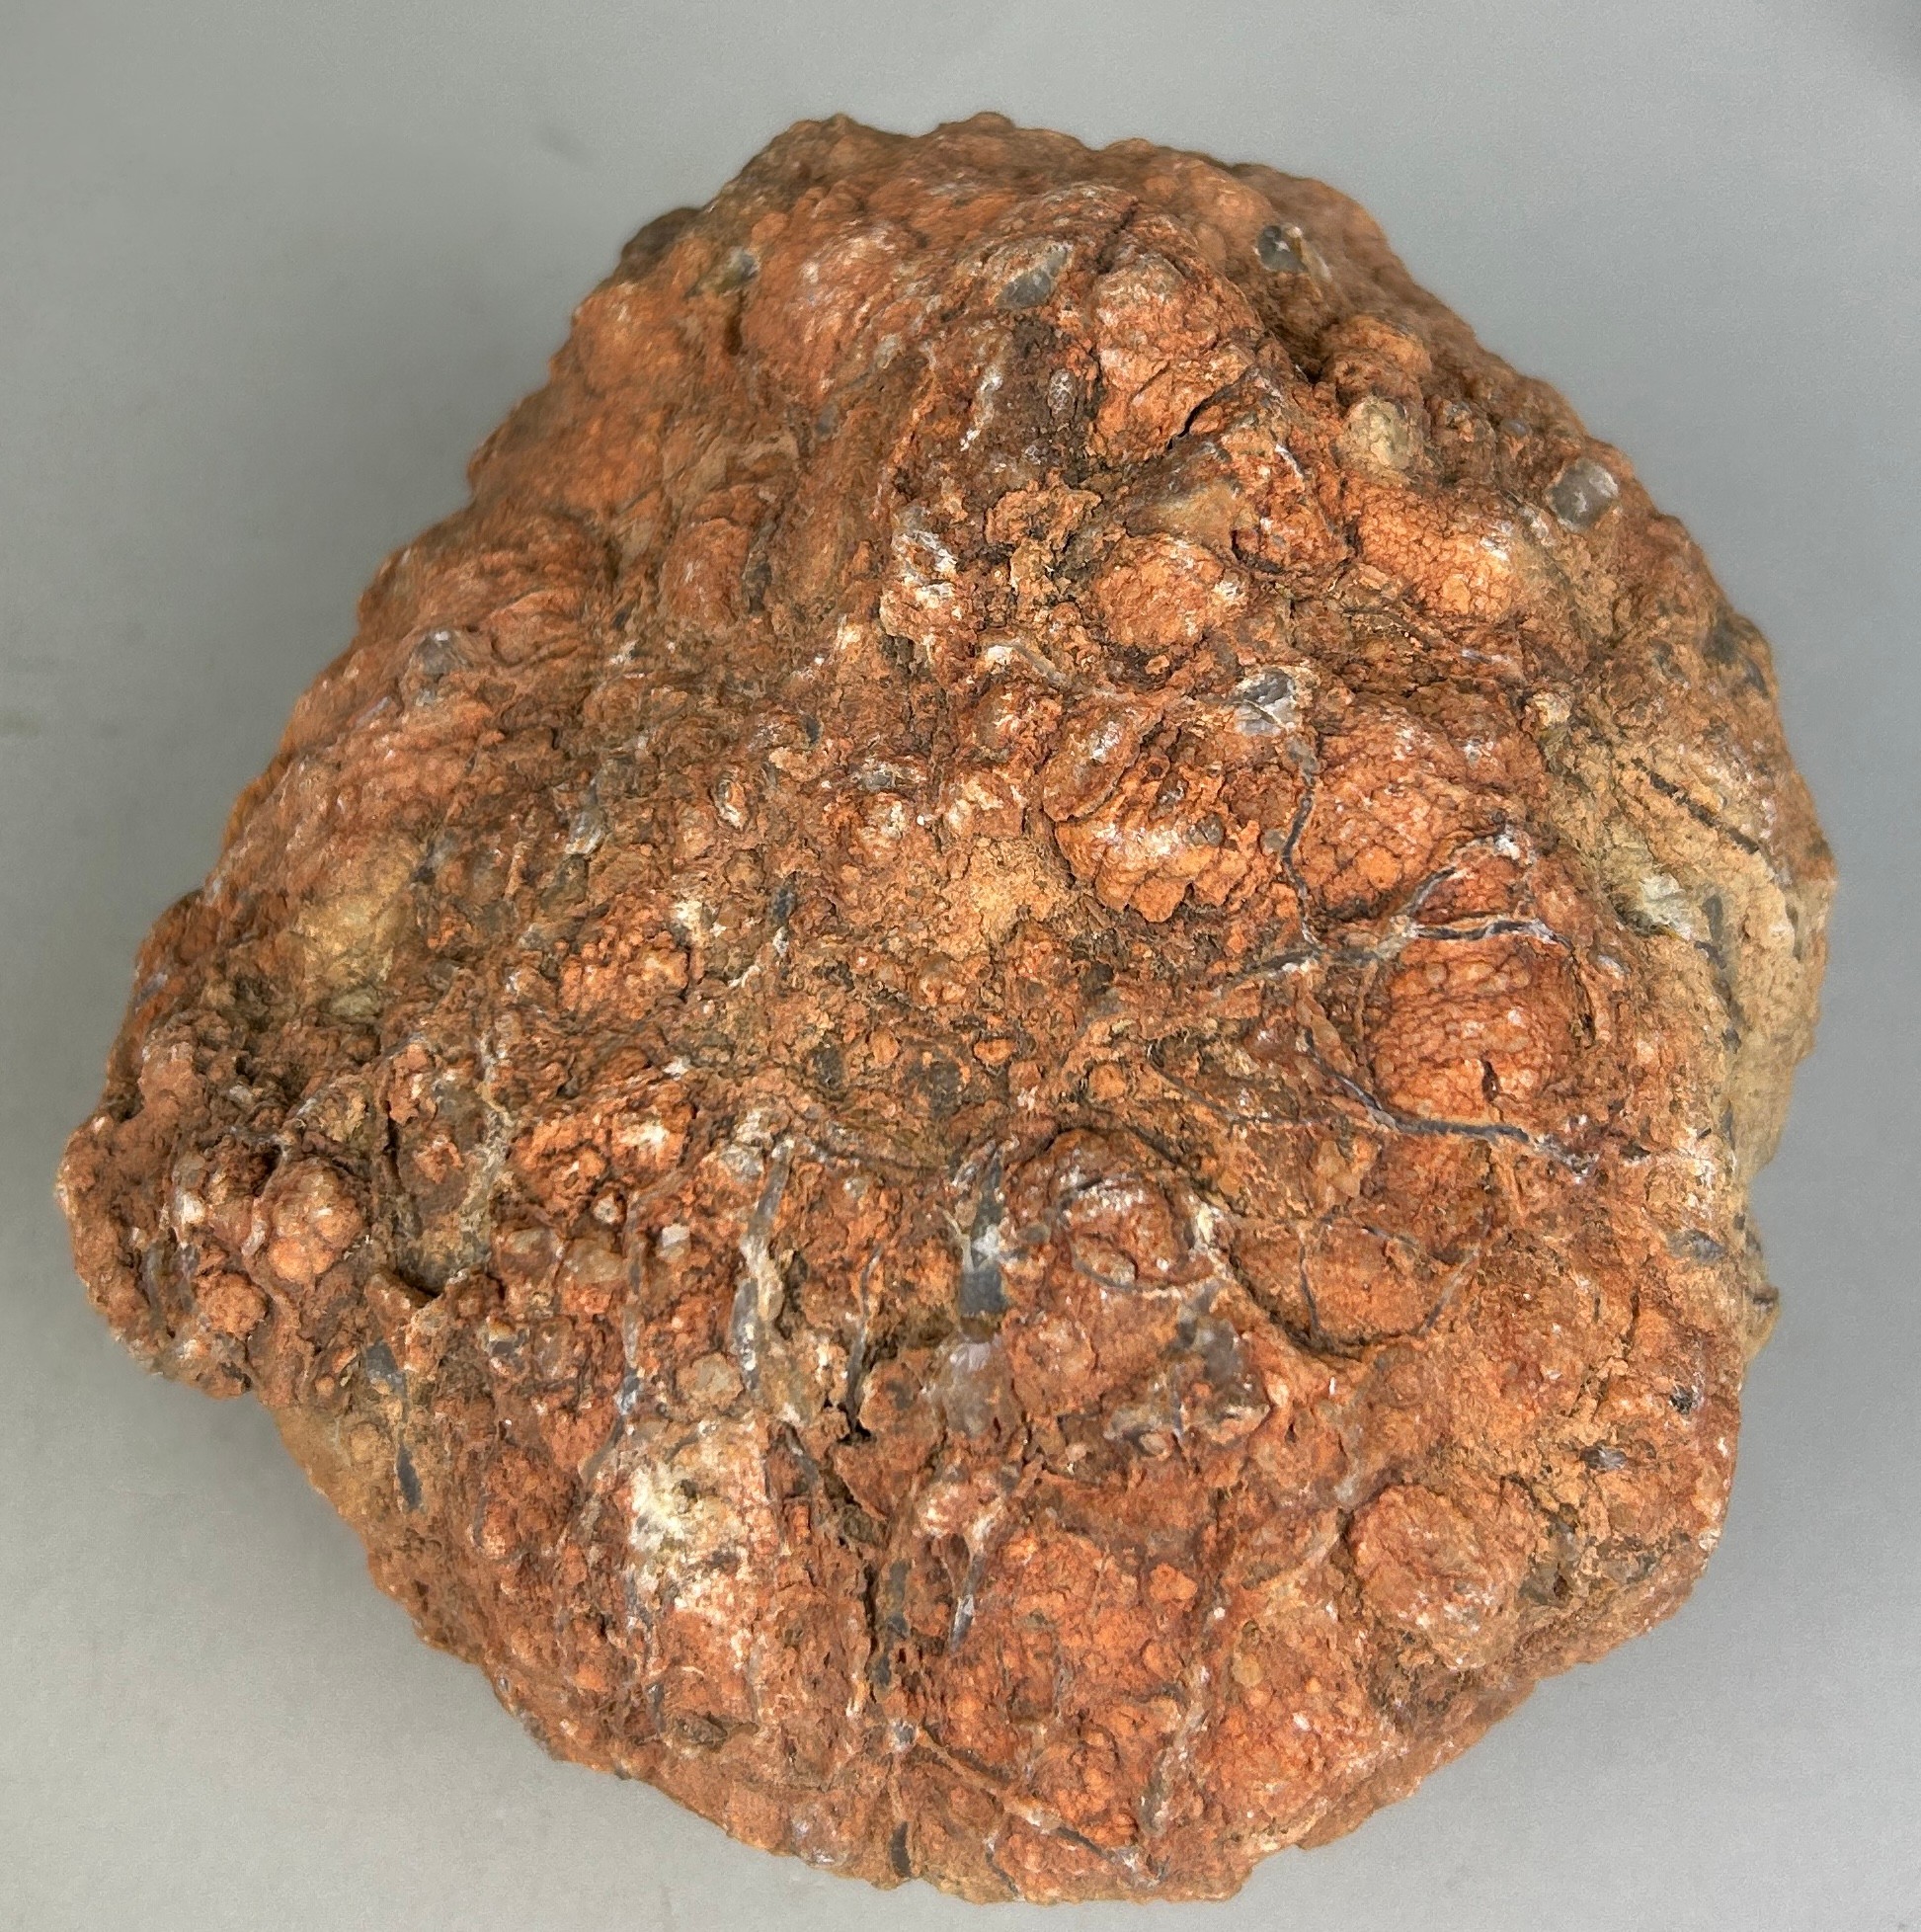 A DINOSAUR 'COPROLITE' OR FOSSIL POO FROM UTAH A large dinosaur coprolite or 'fossil poo' from a